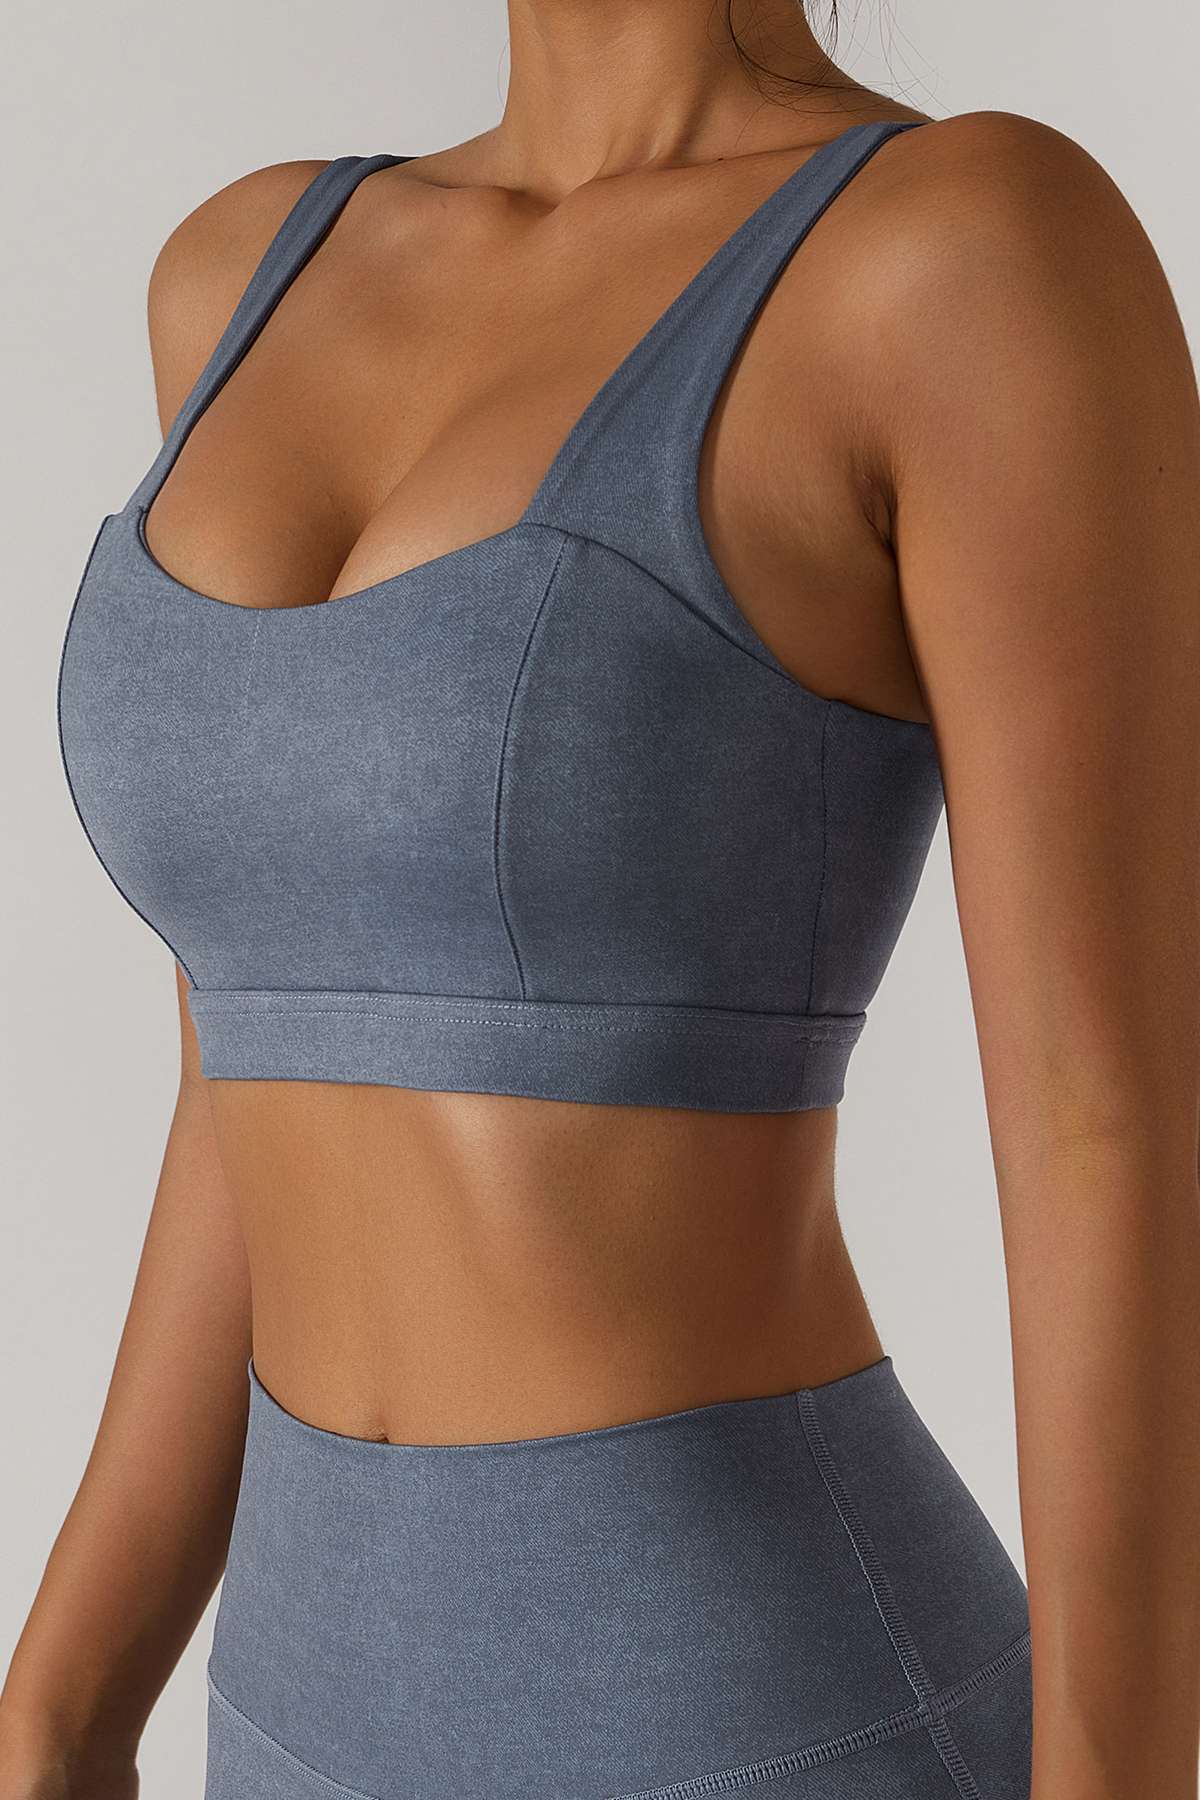 Straight Straps Backless Sports Bras - Light Support for Gym